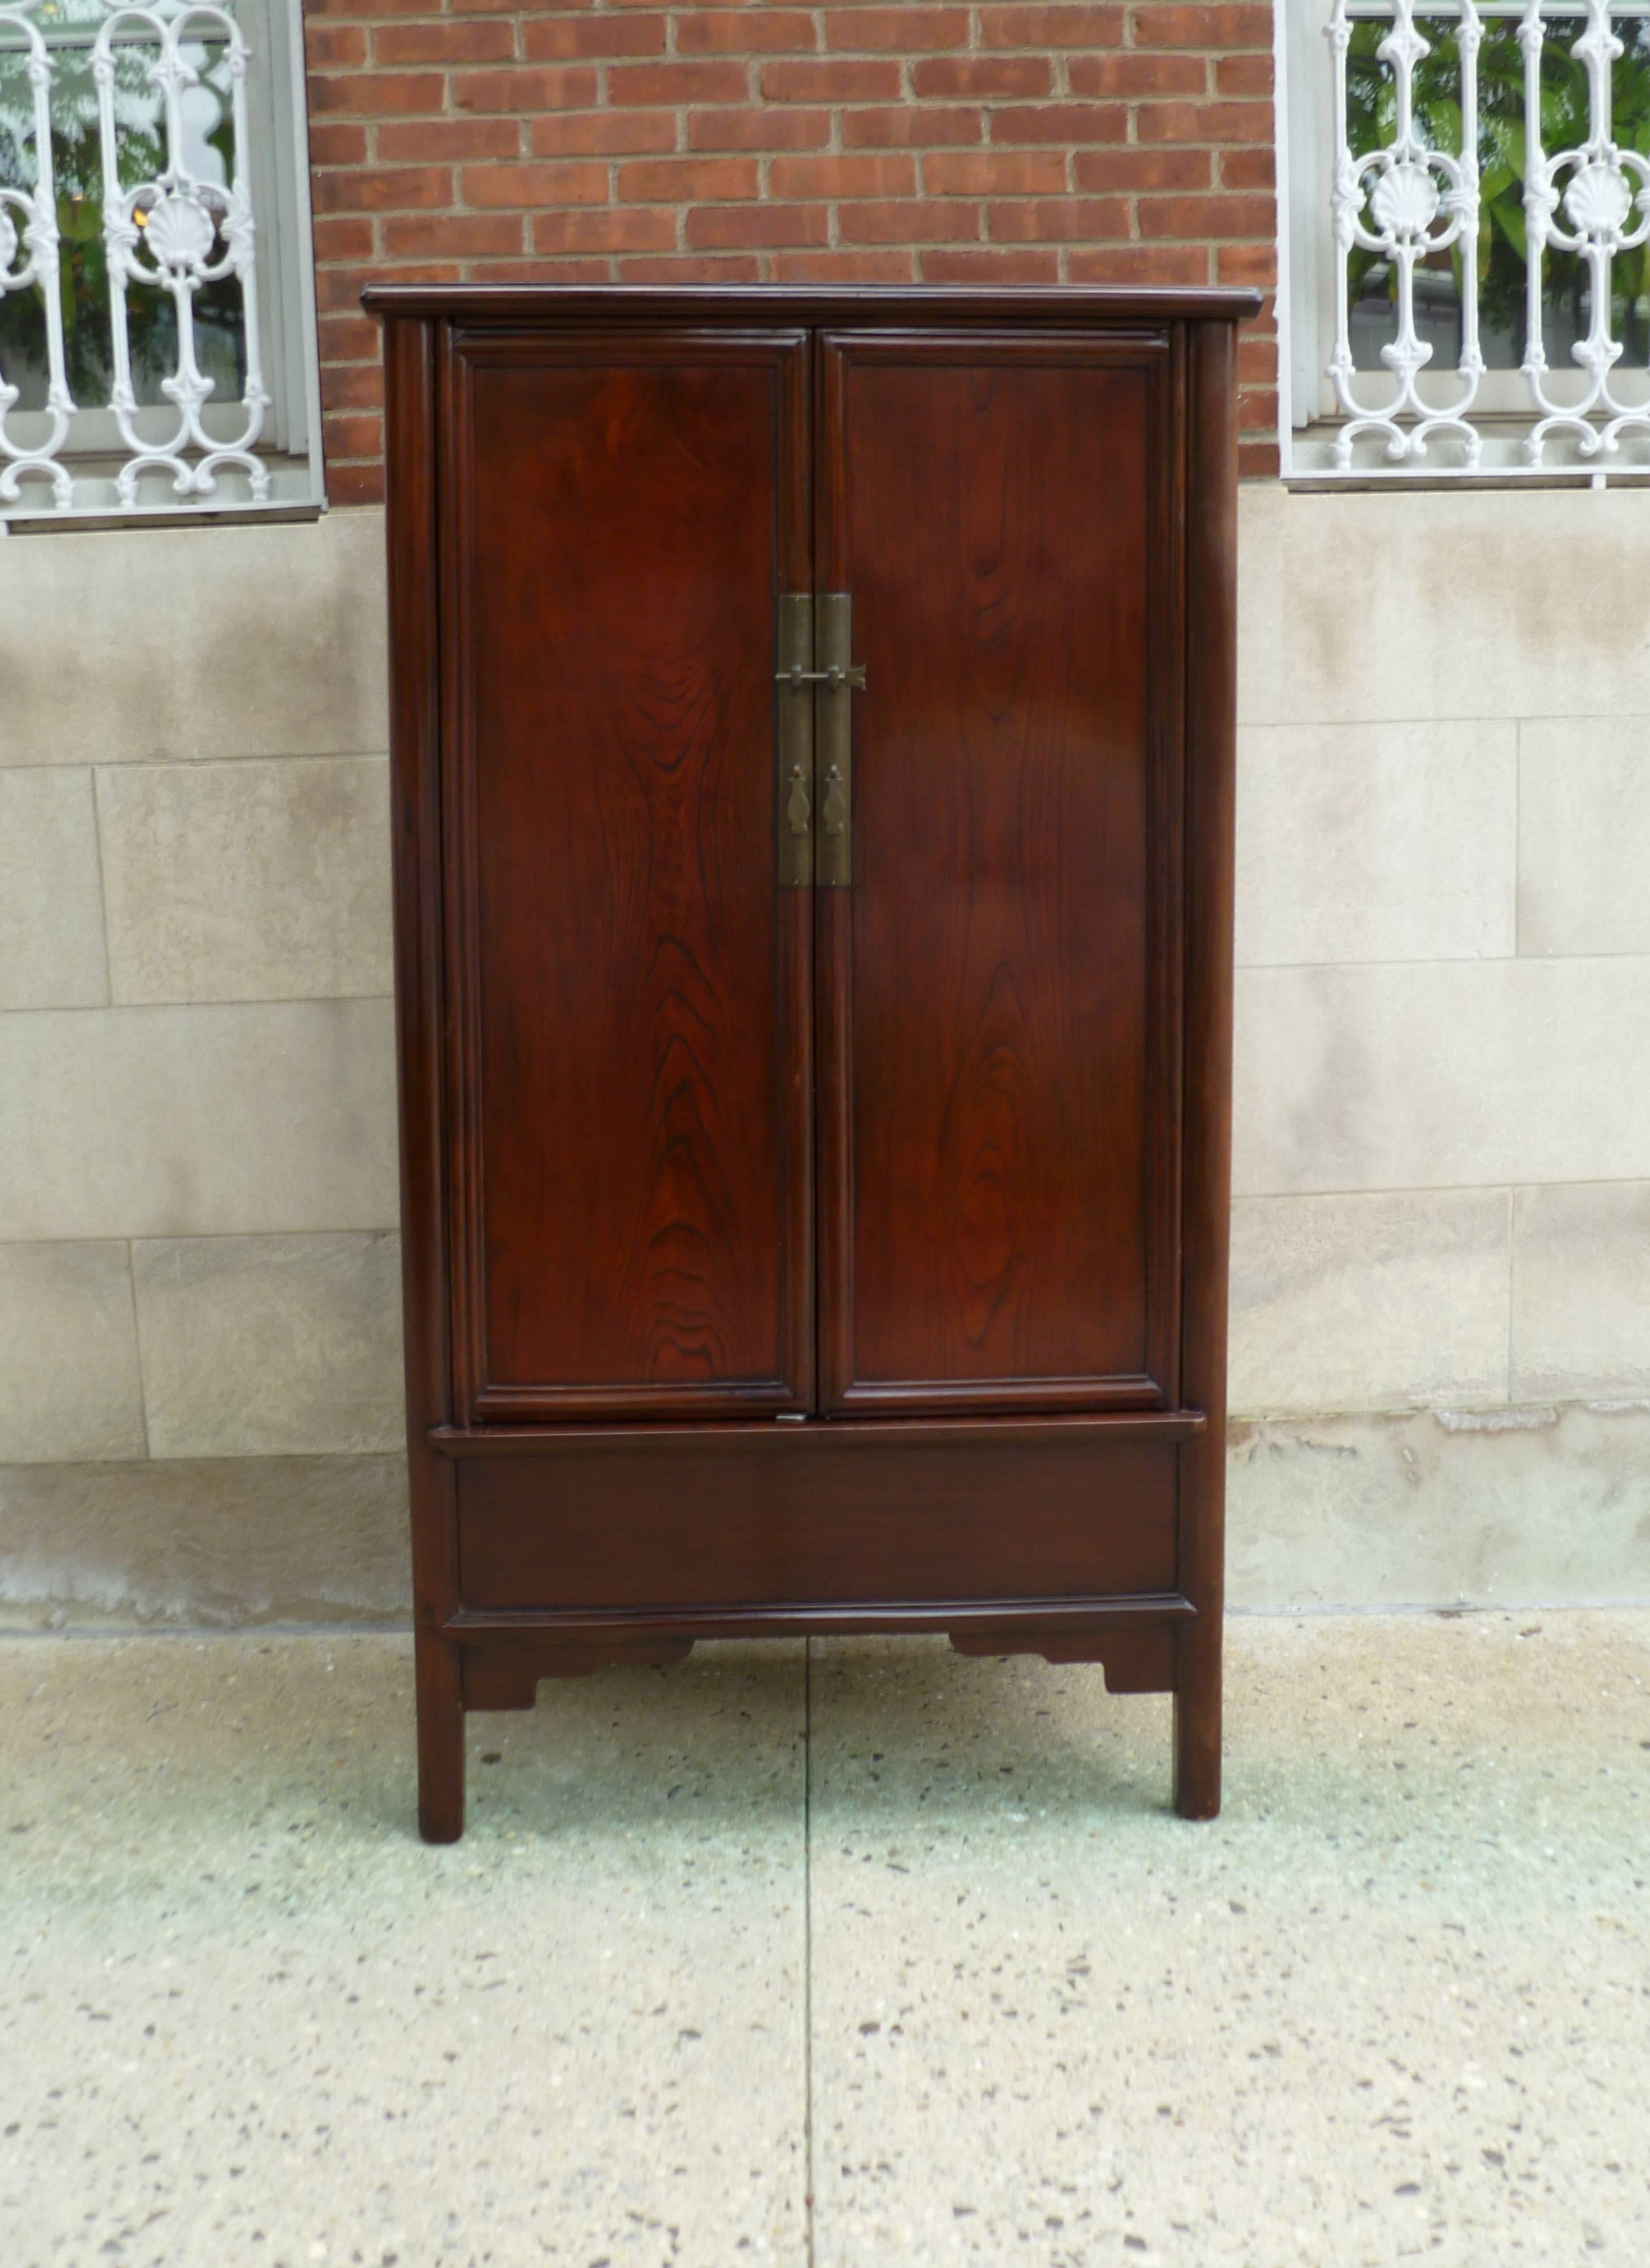 Fine Ju mu wood scholar's cabinet, beautiful wood grain and color, elegant form.  We carry fine quality furniture with elegant finished and has been appeared many times in 